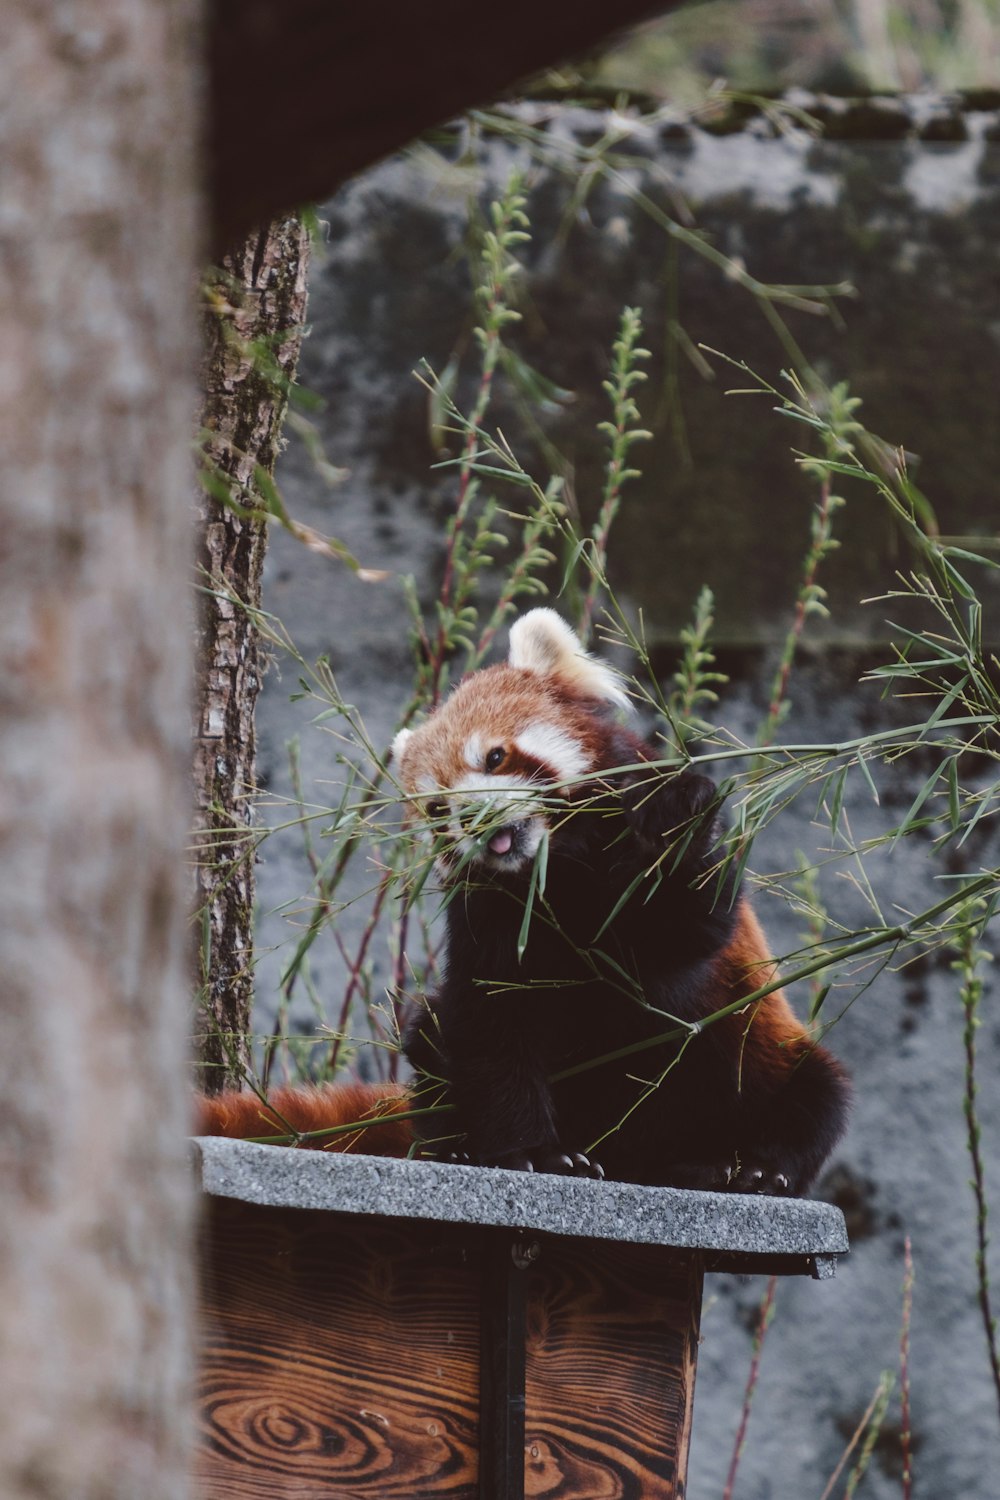 a red panda bear sitting on top of a wooden bench